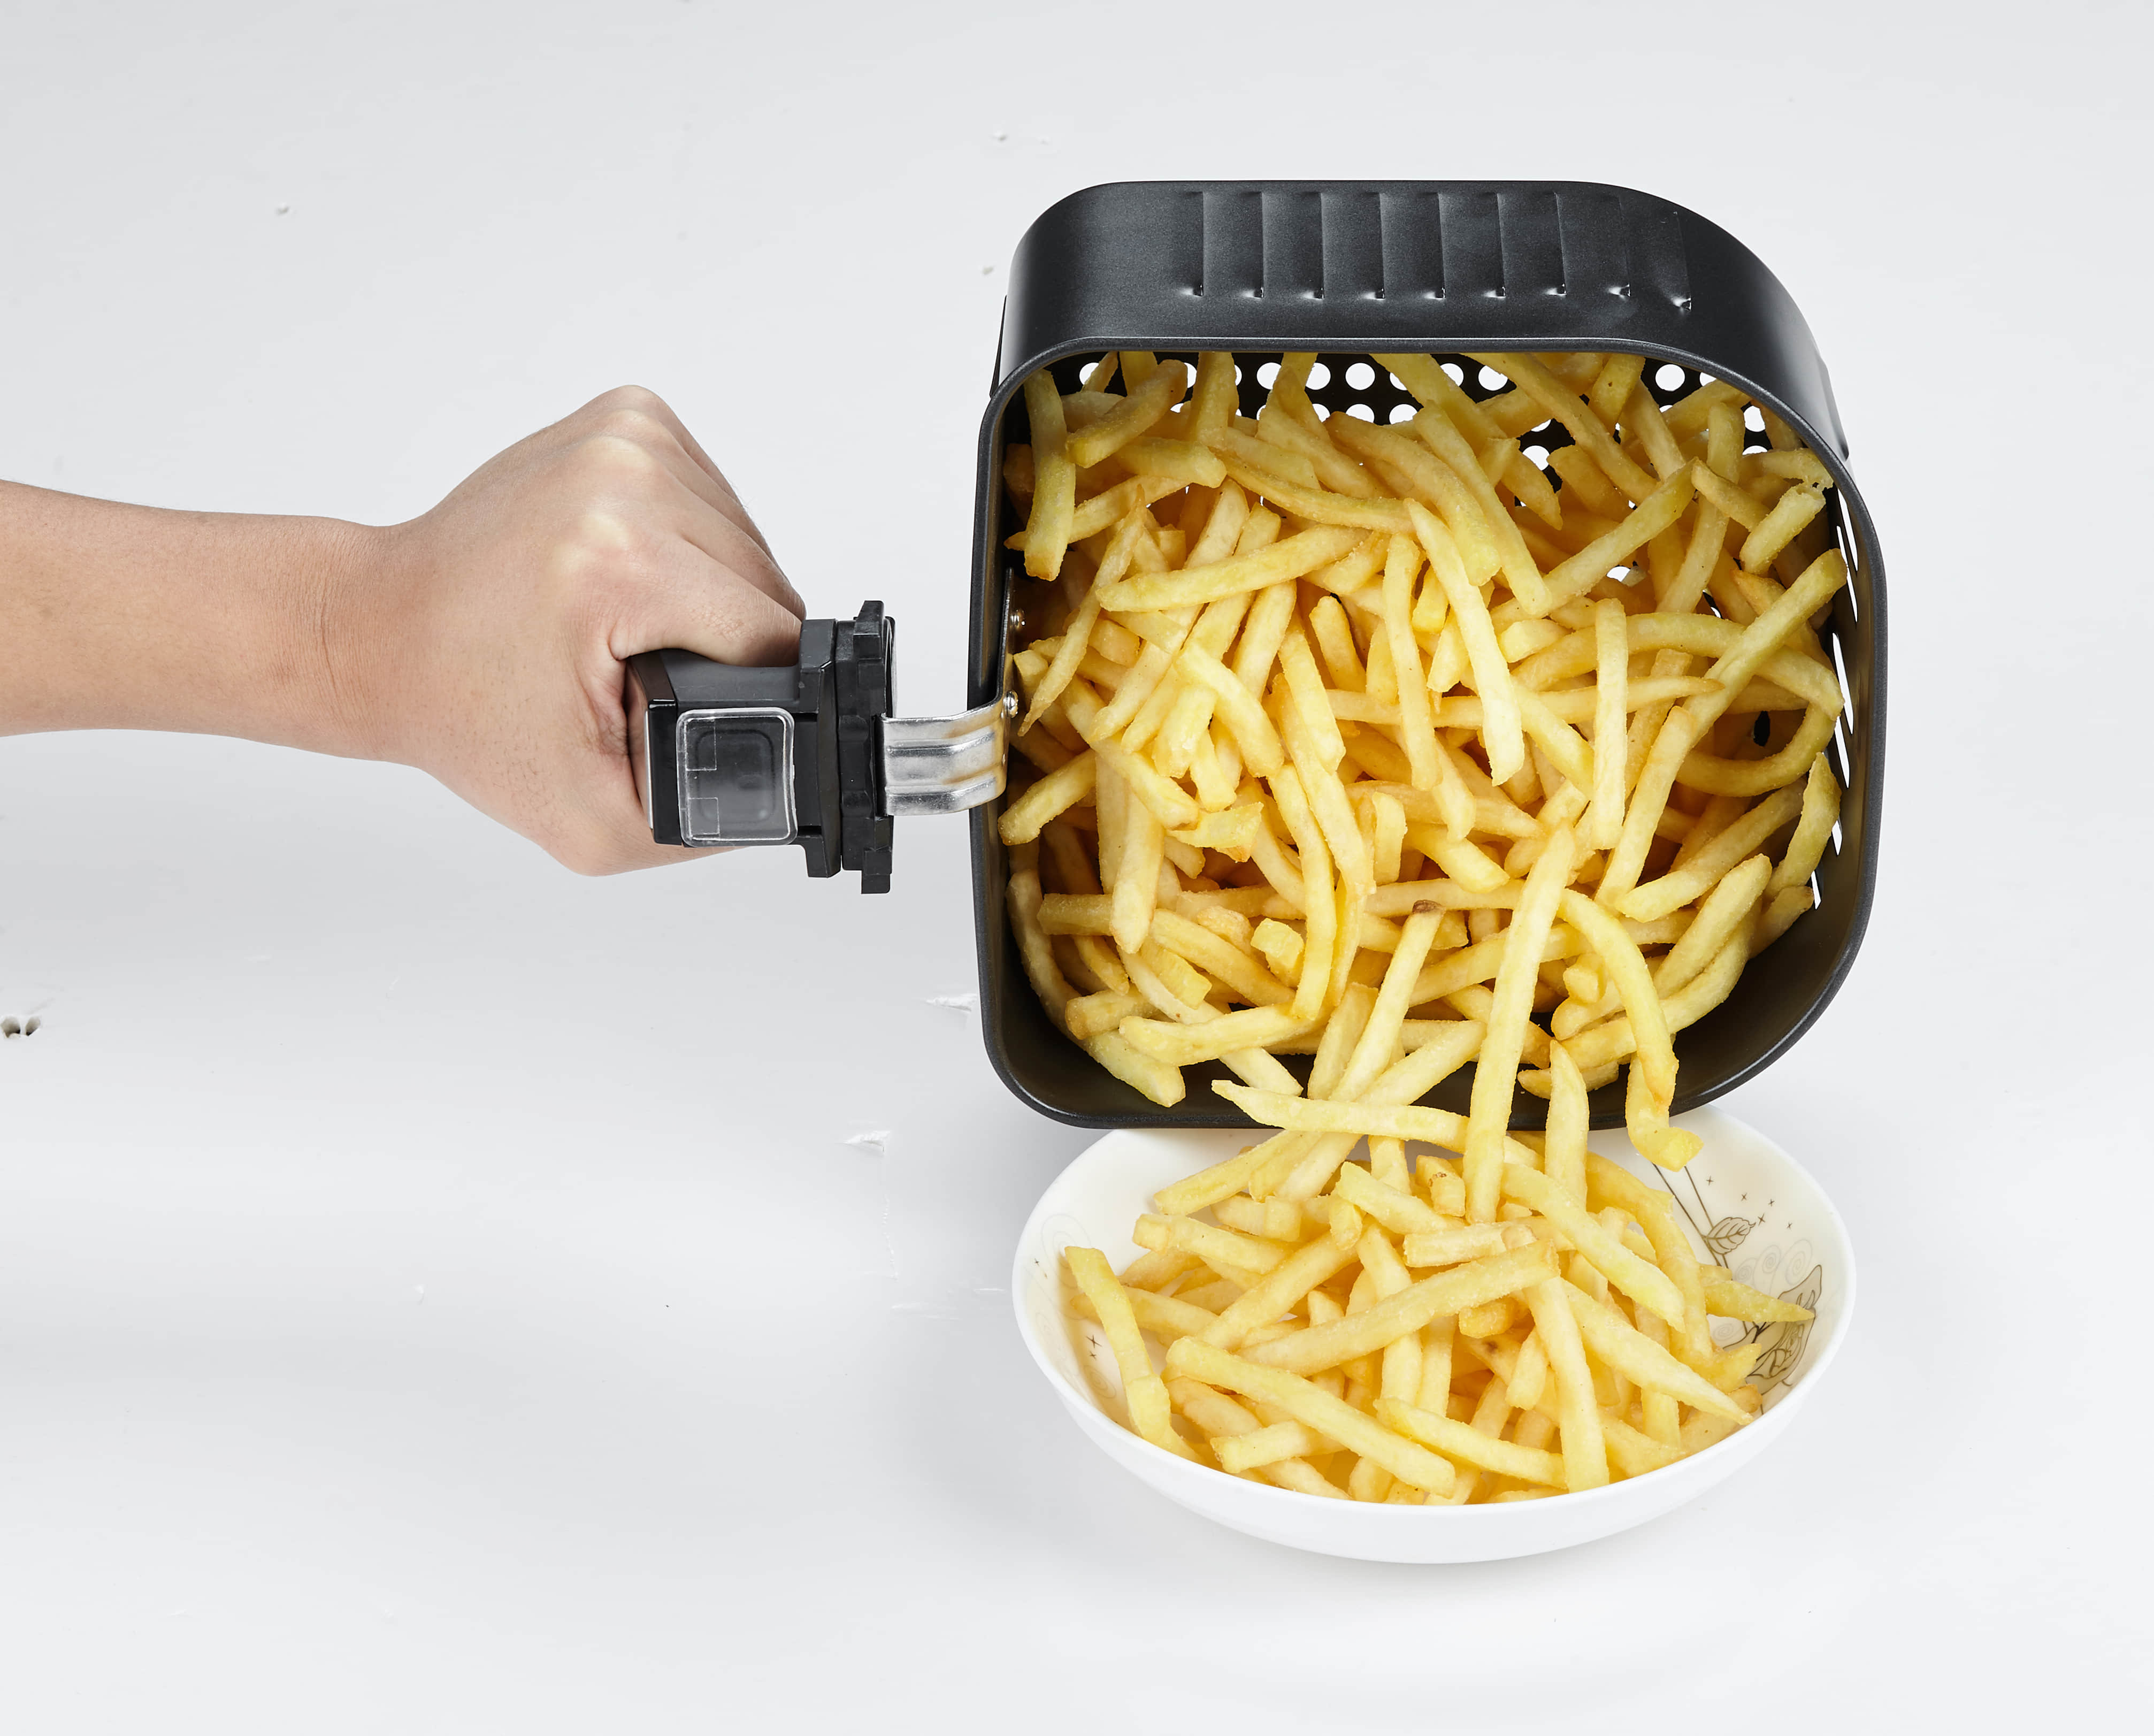 The air fryer uses high-speed air circulation technology to allow you to make more fryers than a traditional one.